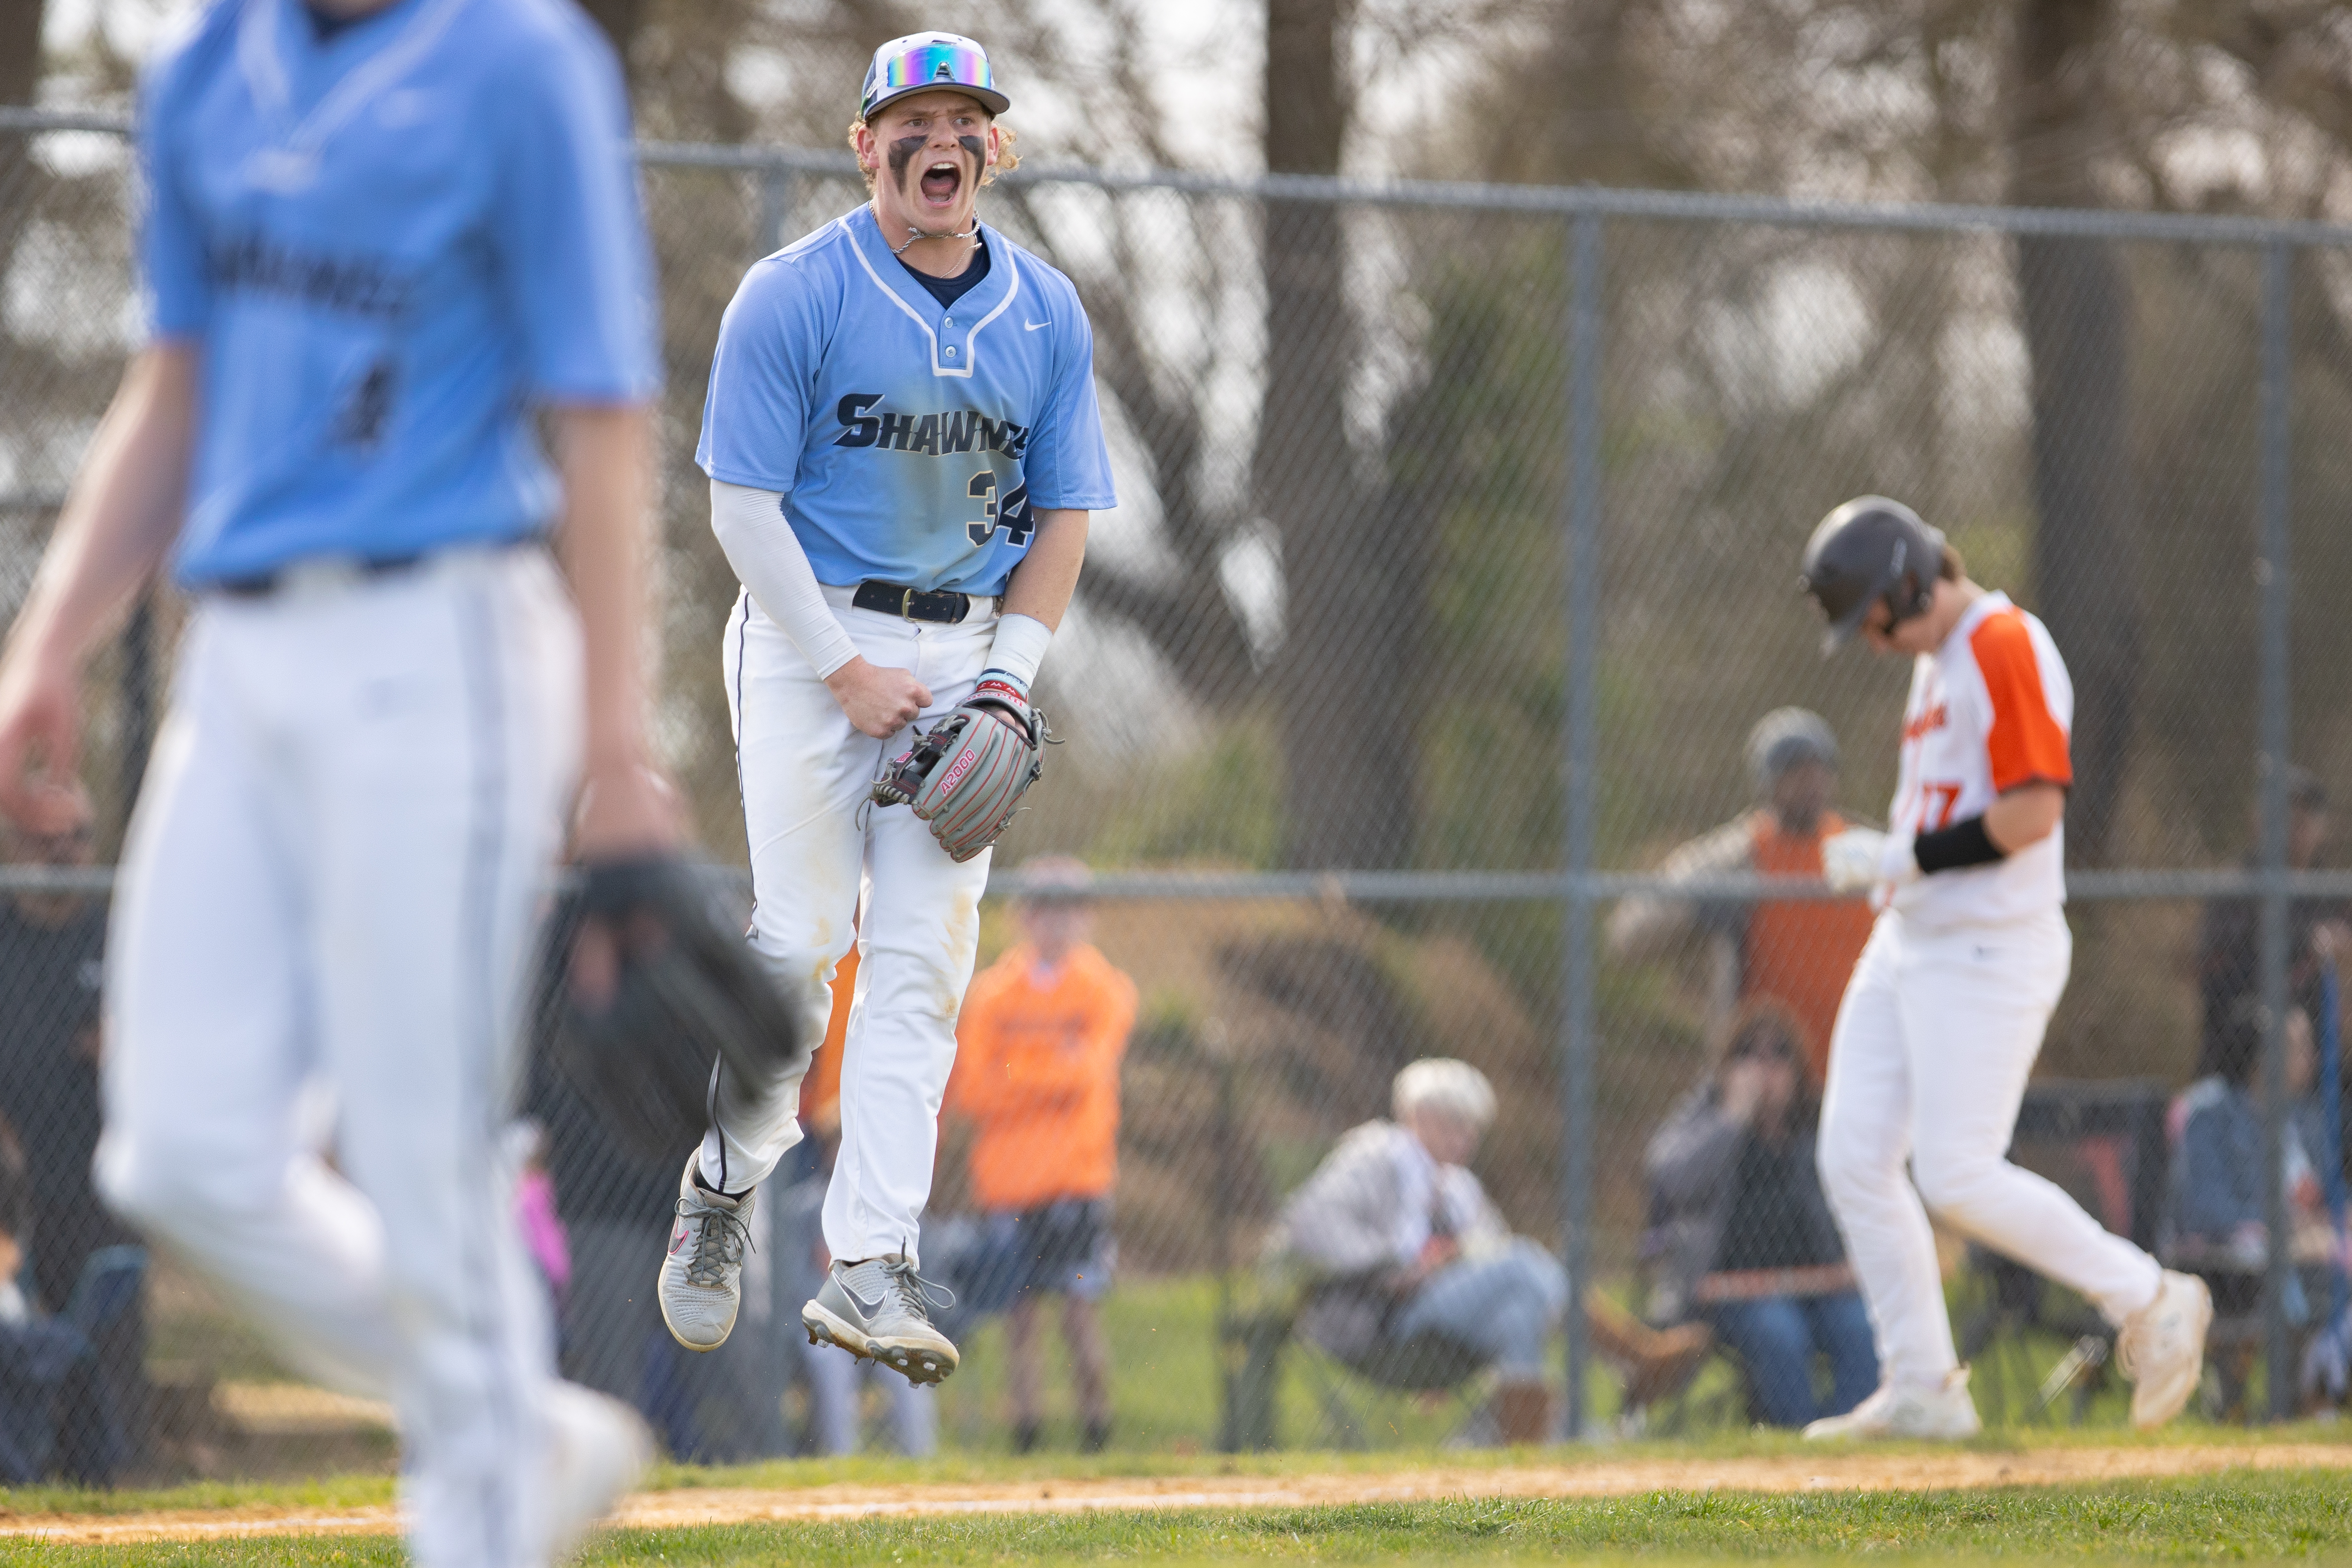 Michael Pierson (34) of Shawnee, celebrates an out at first in Marlton, NJ on Monday, April 3, 2023.